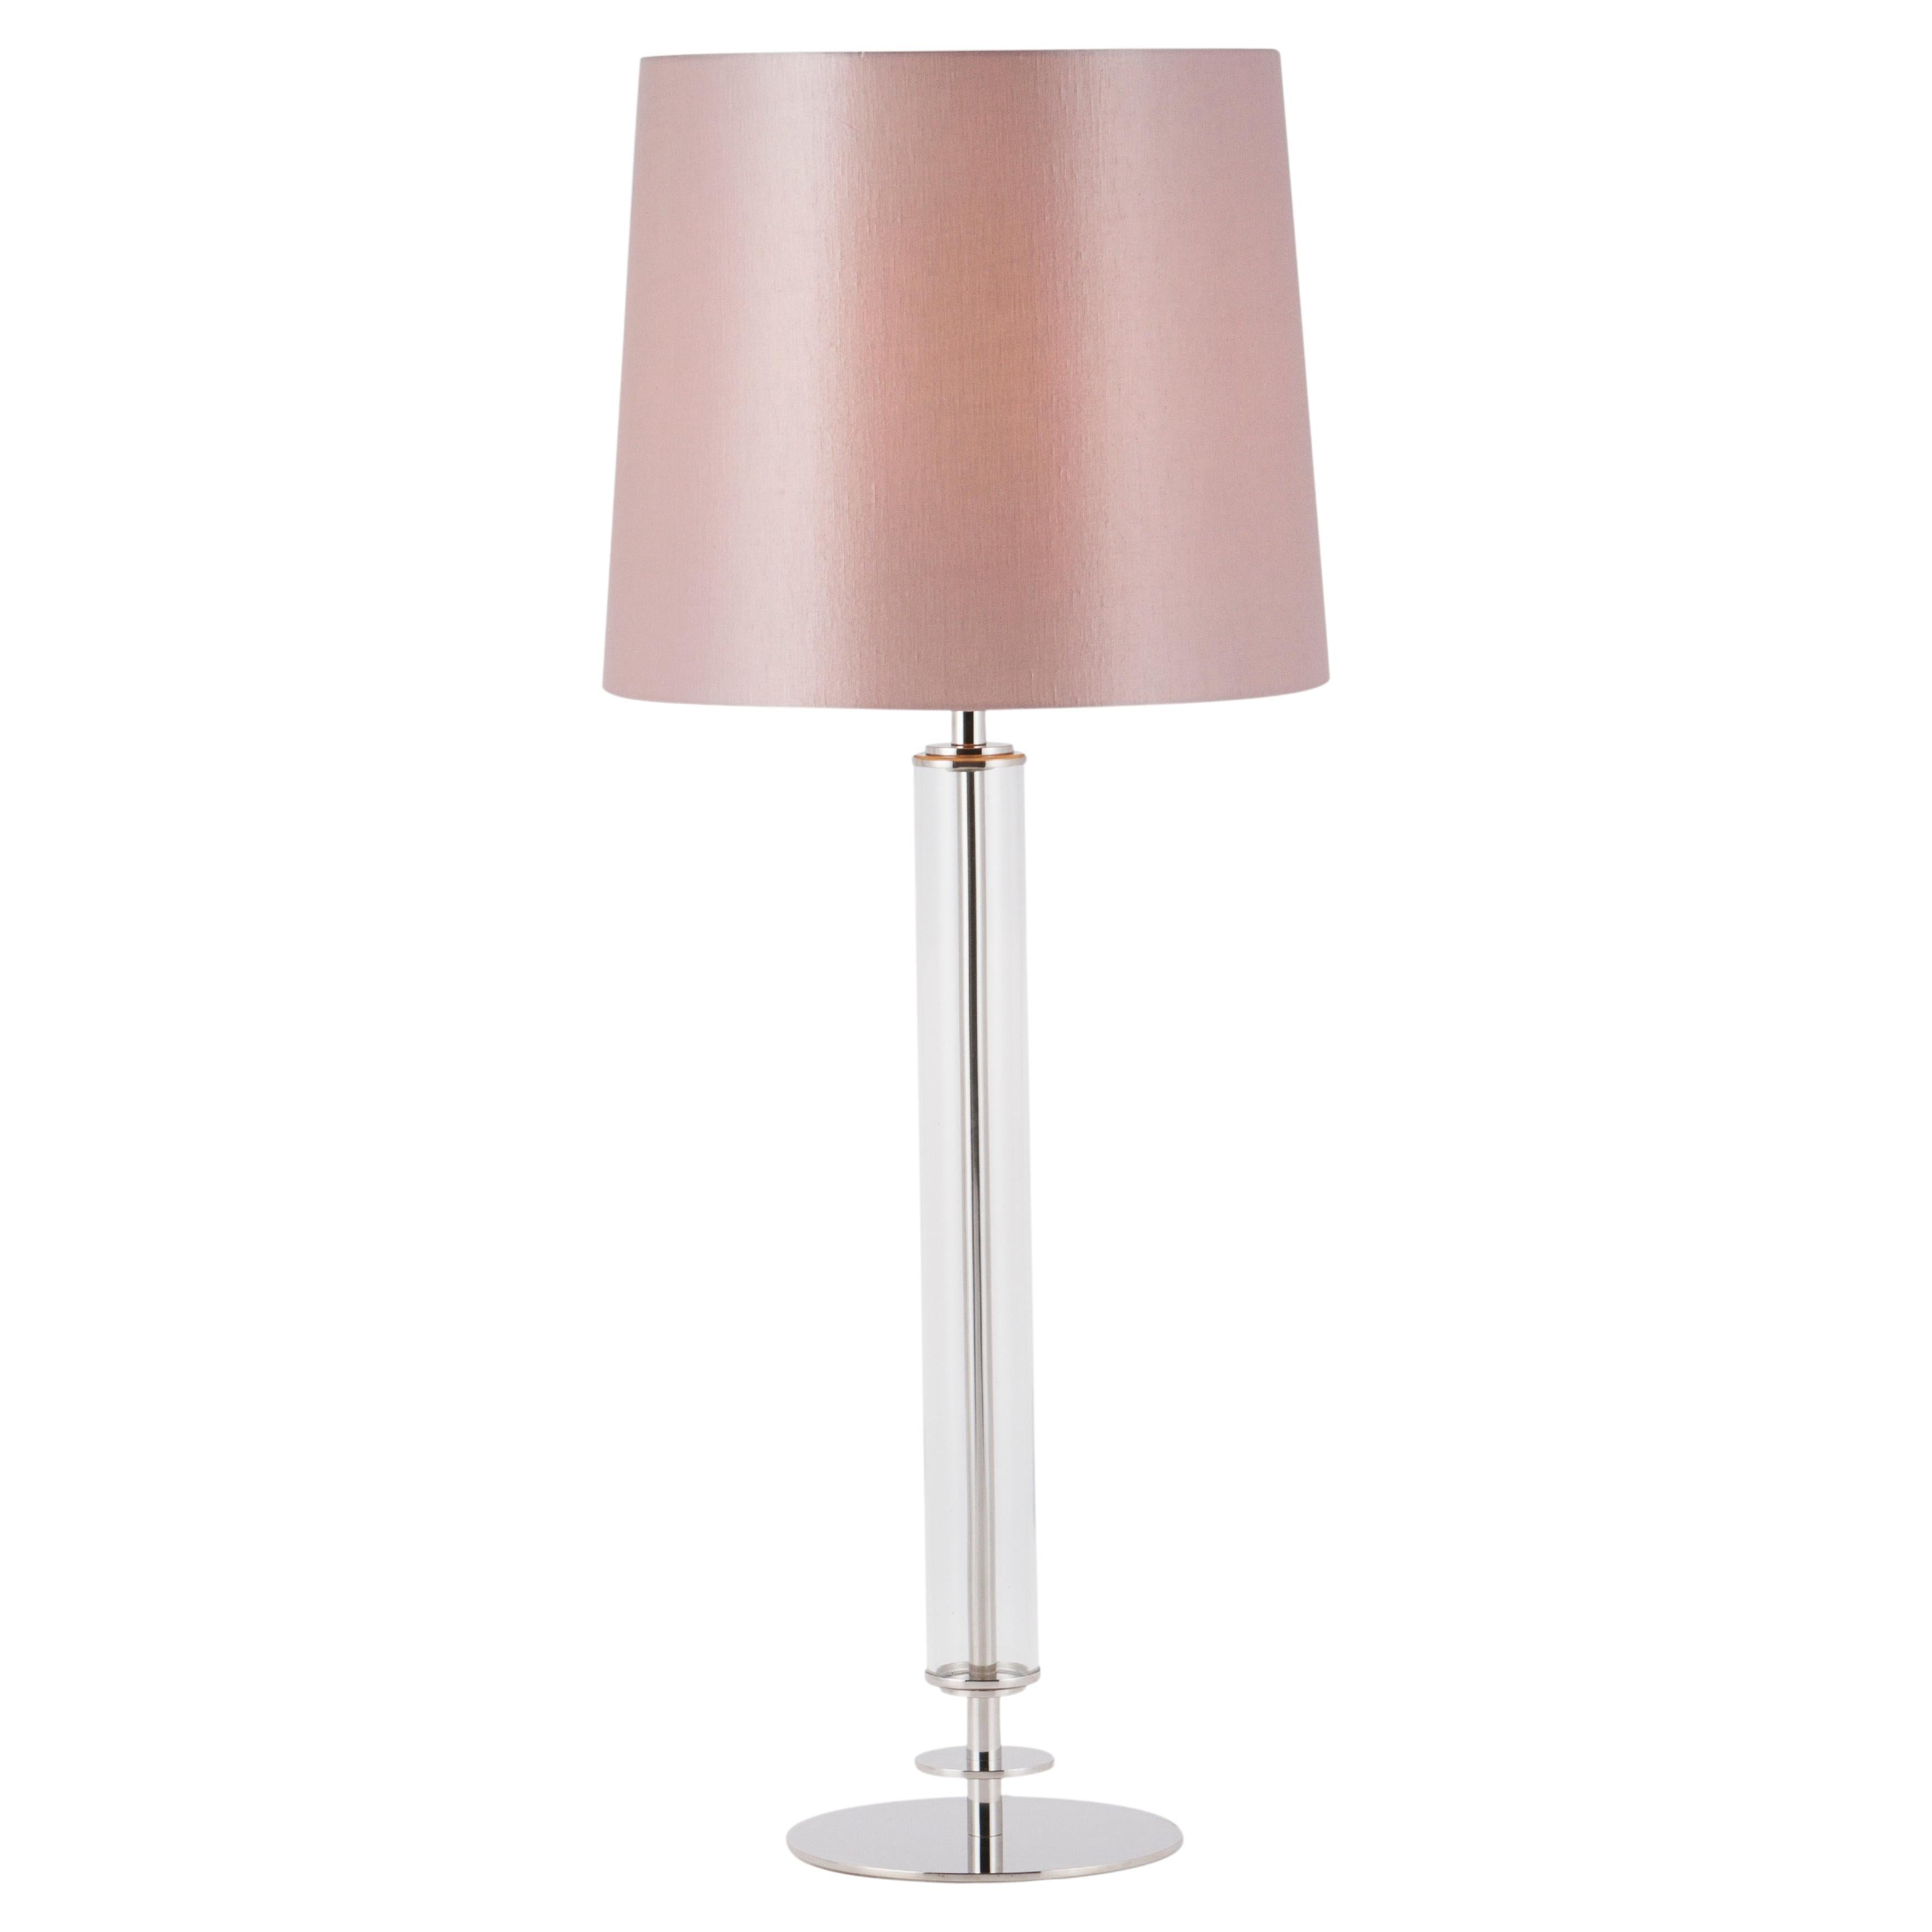 Hand-Crafted Set of 2 Modern Dumont Table Lamps, Pink Lampshade, Handmade in Portugal For Sale